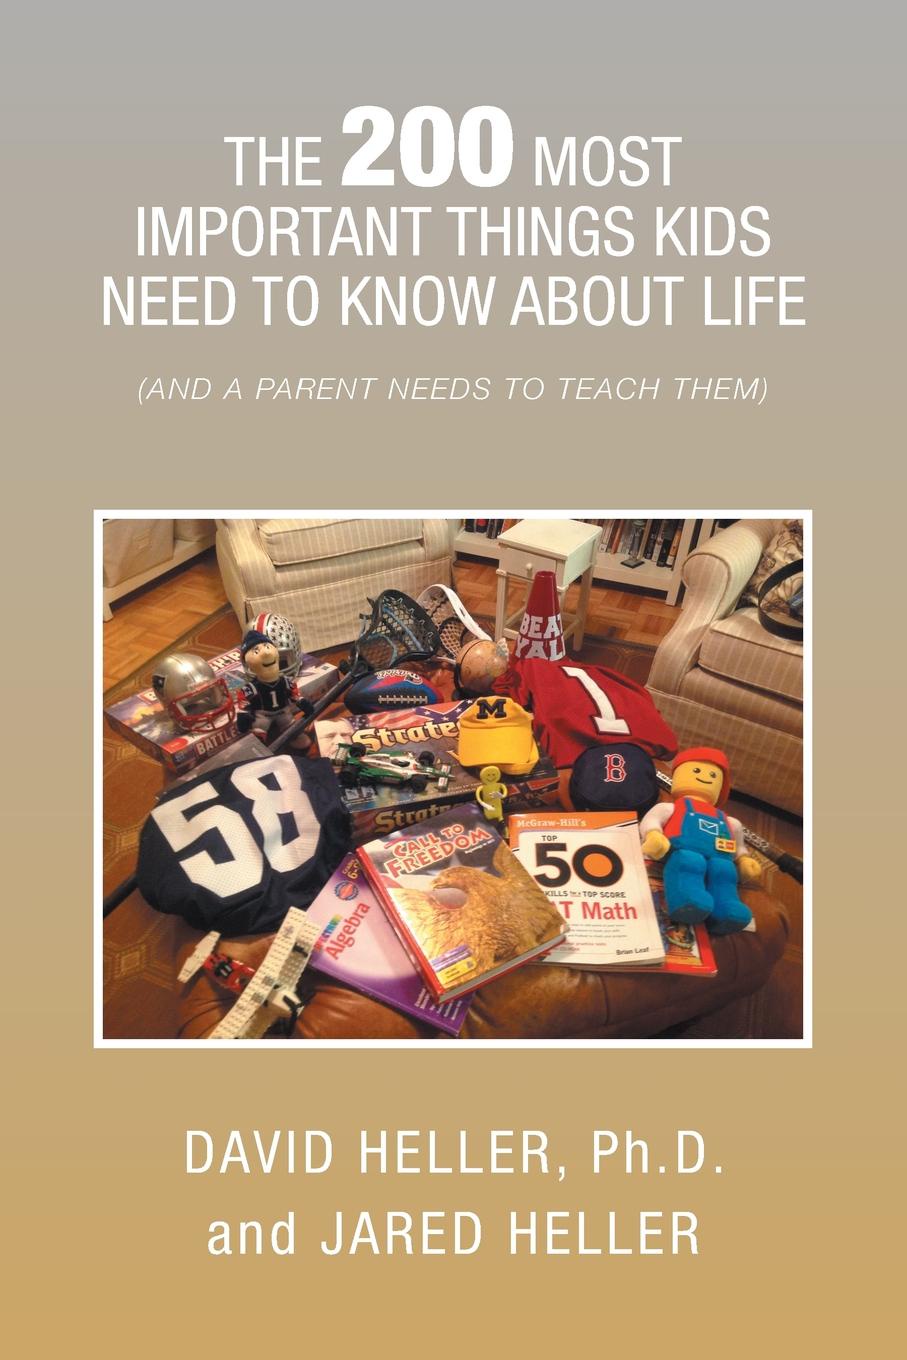 The 200 Most Important Things Kids Need to Know about Life. (And a Parent Needs to Teach Them)